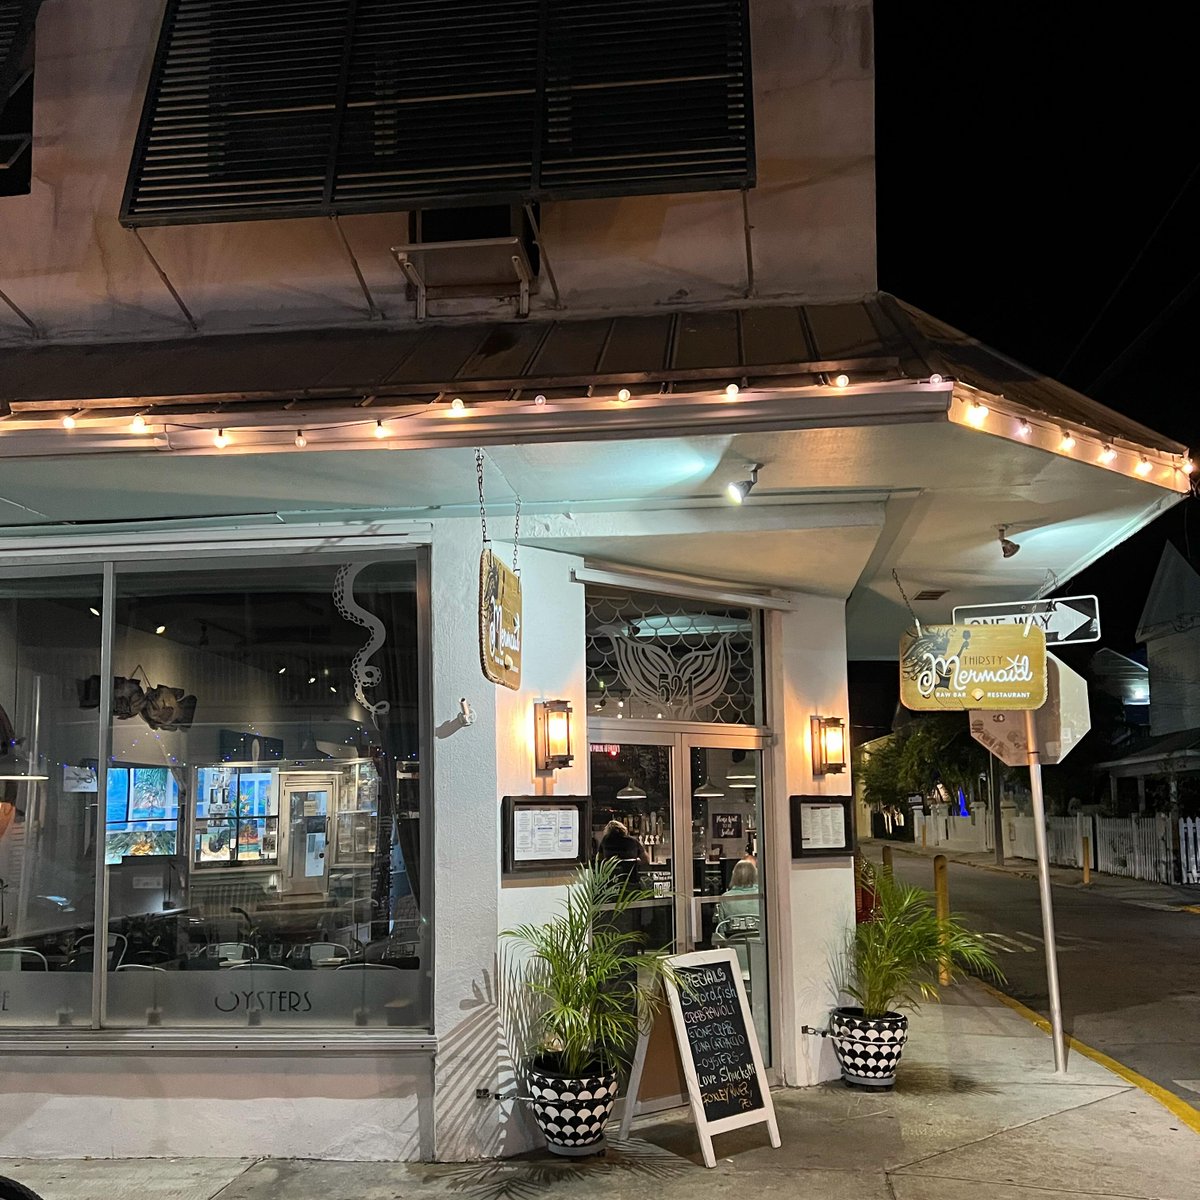 Here's a fun little place! Who's been to the Thirsty Mermaid on Fleming? #keywest #thirstymermaid #keywestrestaurant 📷 @thirstymermaidkeywest

More: PartyinKeyWest.com/wp/
Follow us: @PartyInKeyWest
Hashtag us: #PartyInKeyWest